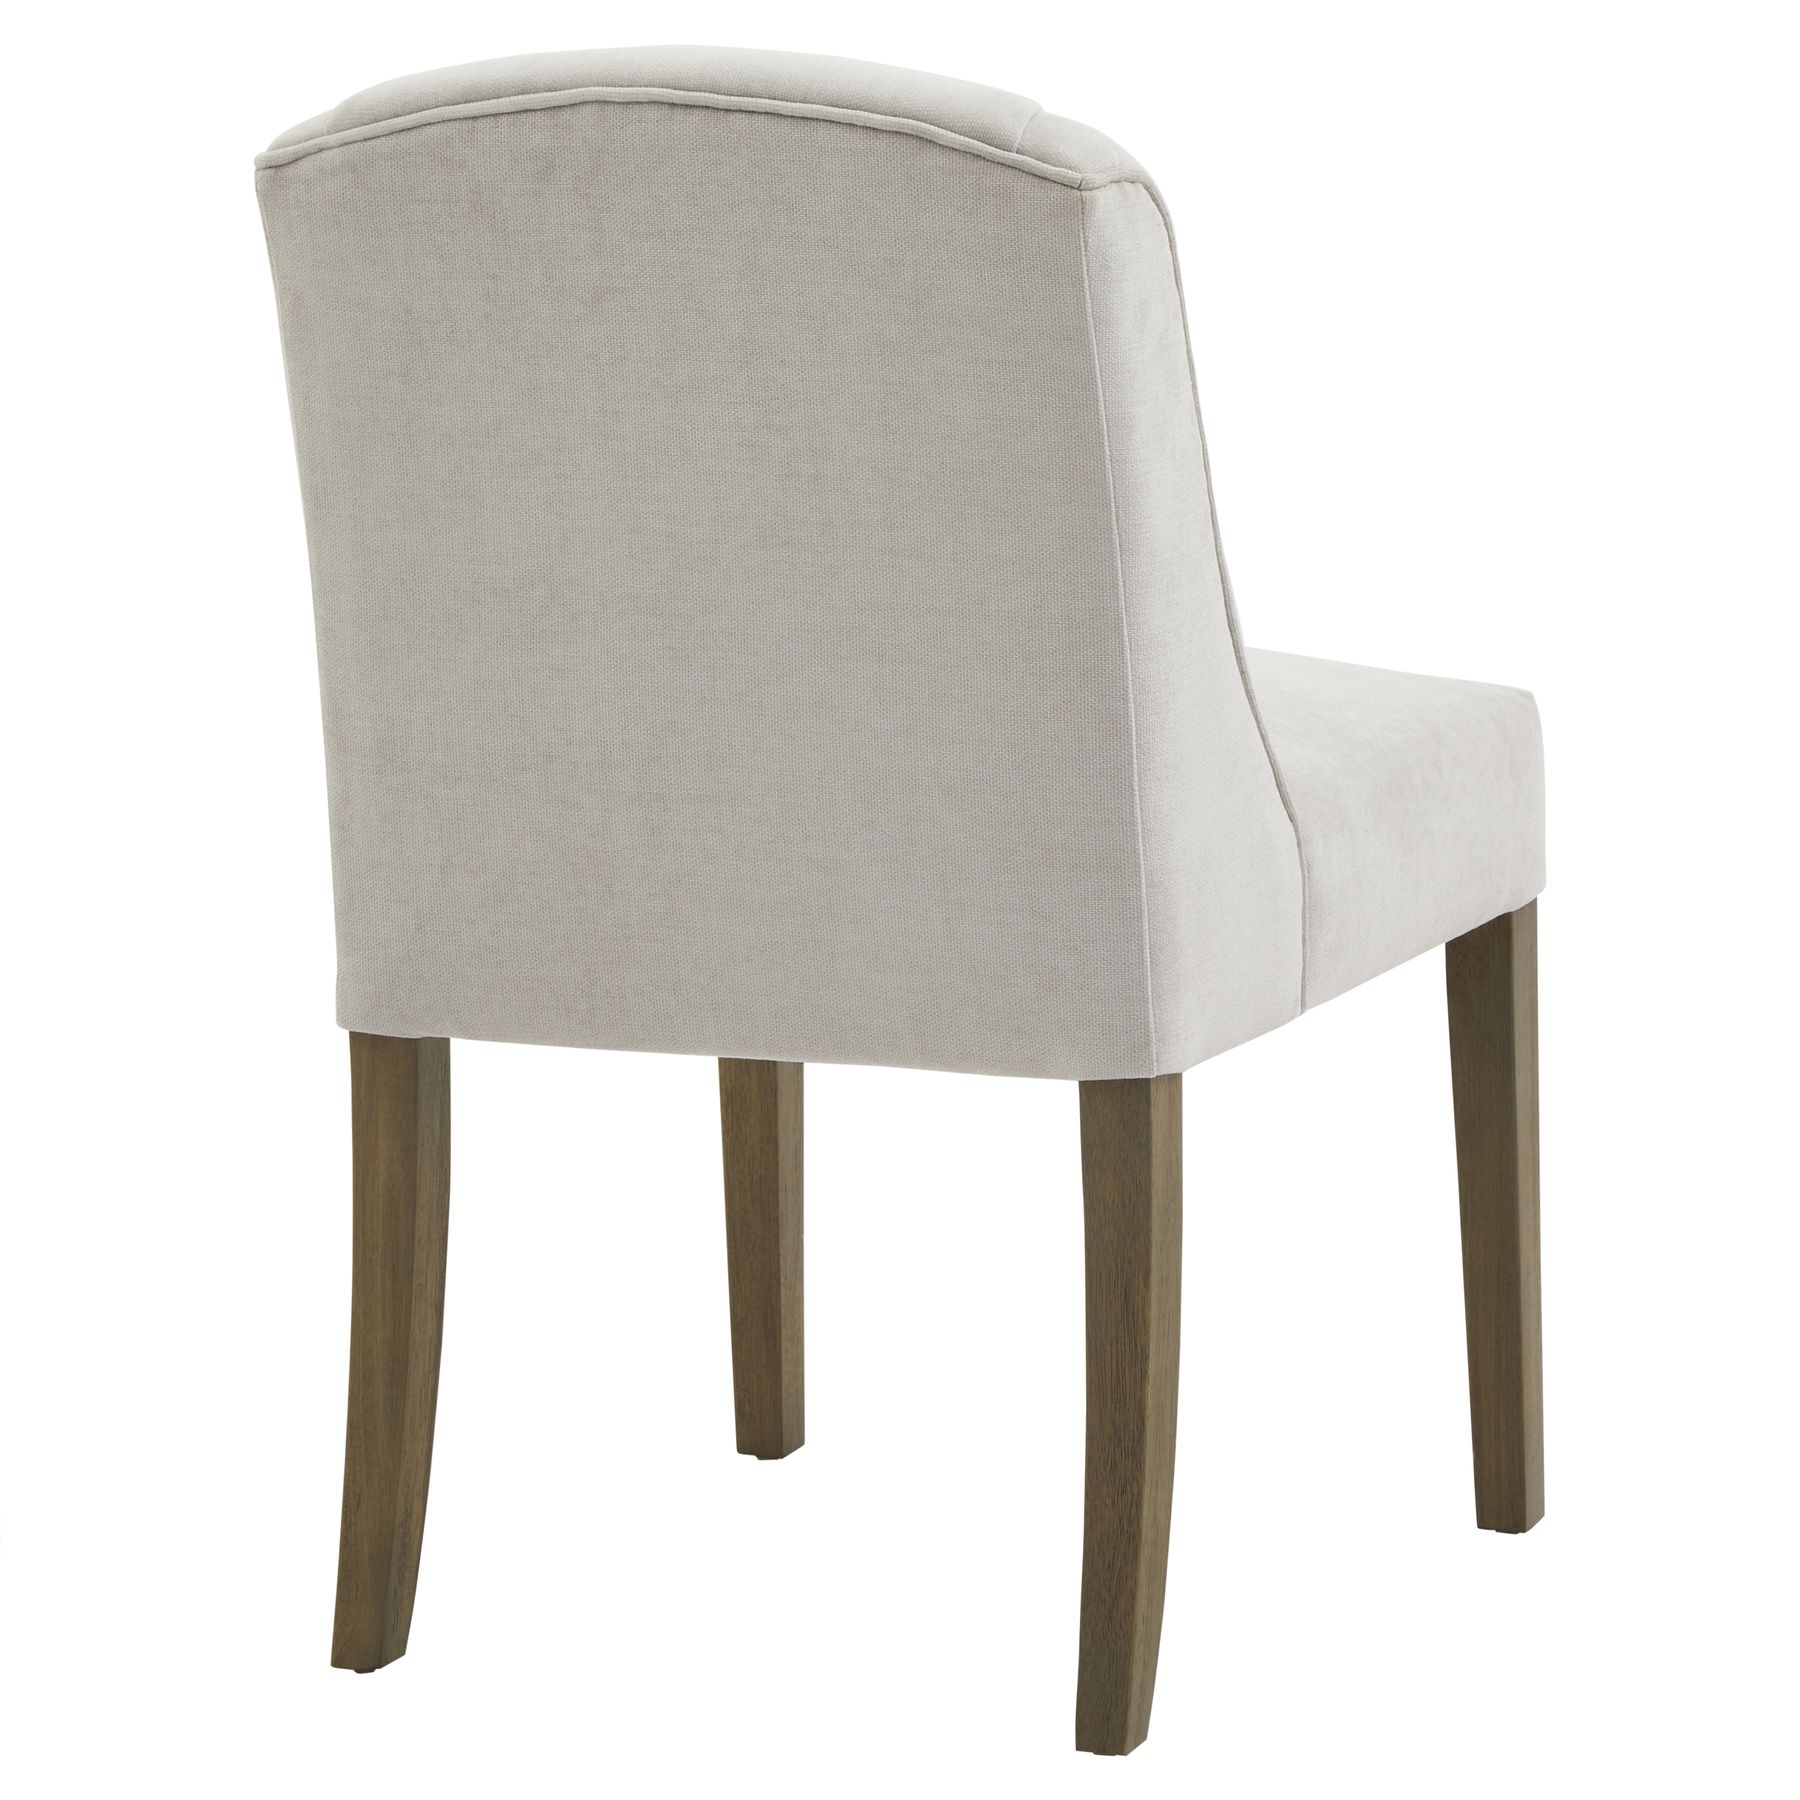 Compton Grey Dining Chair - Image 2